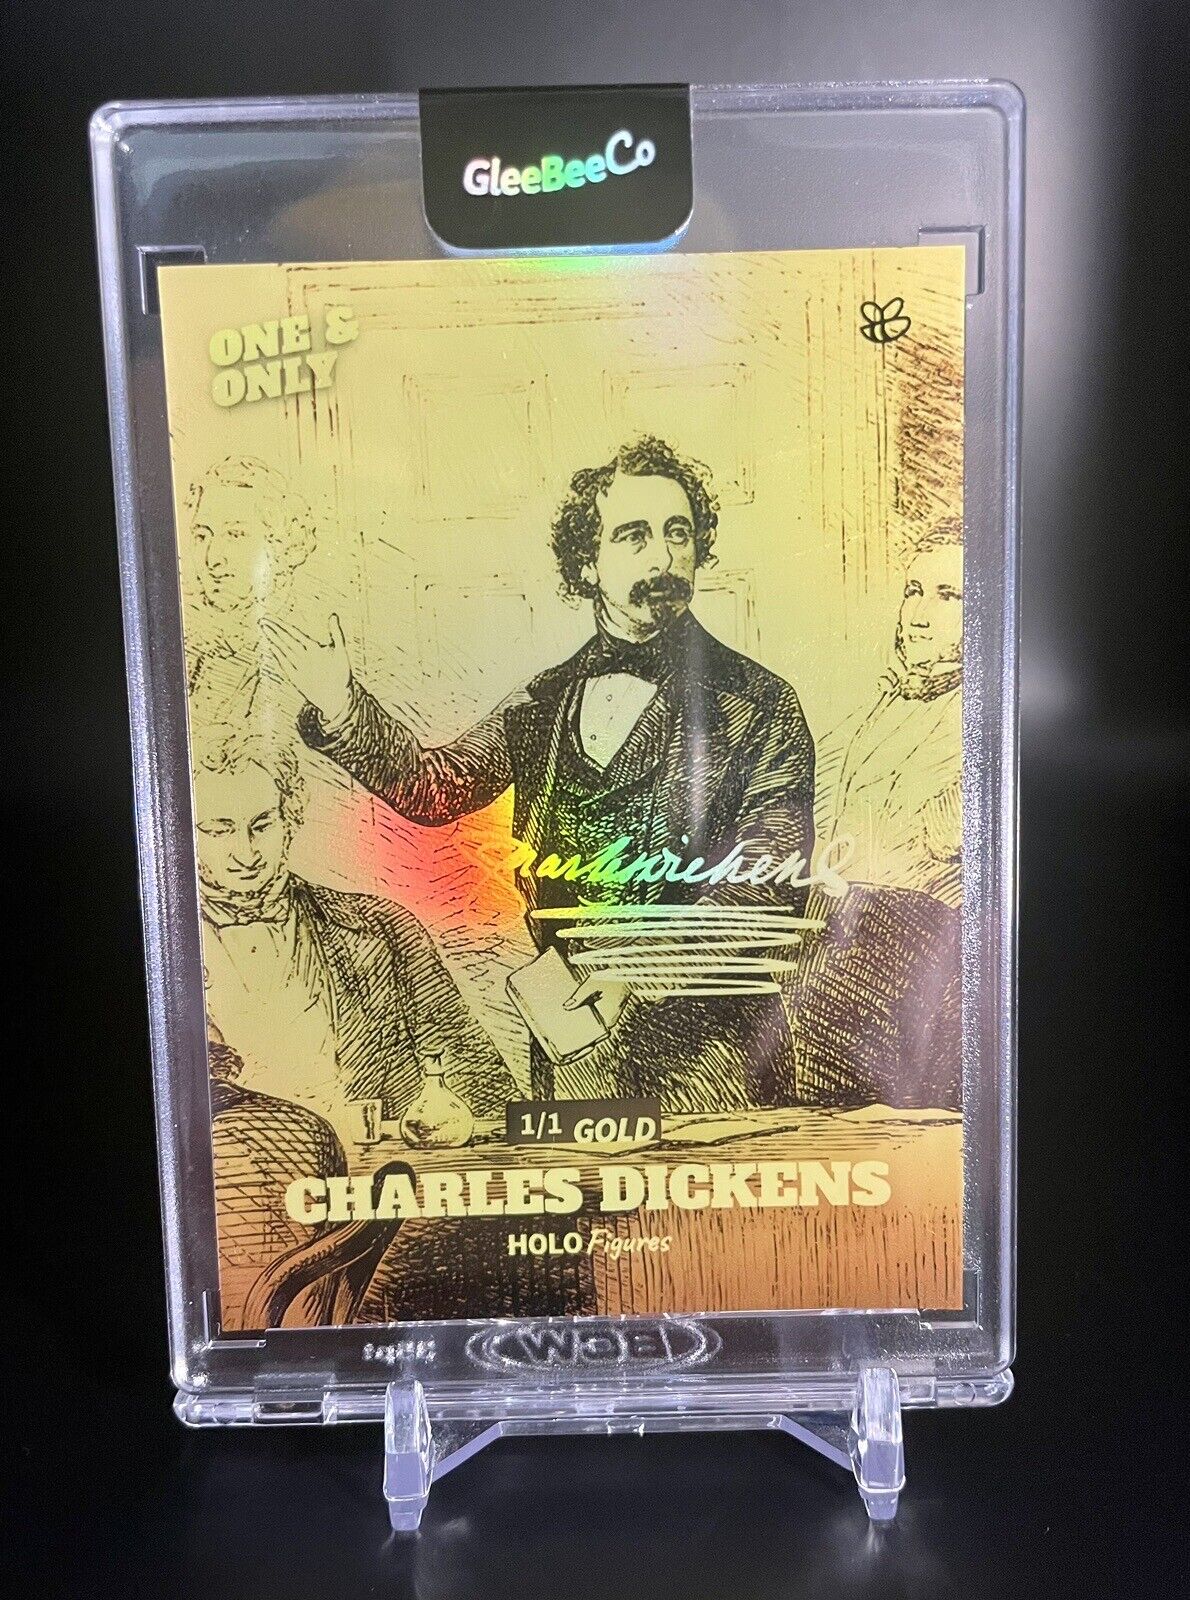 2024 GleeBeeCo CHARLES DICKENS Card ENCASED Holo Gold Signature 1/1 - ONLY ONE